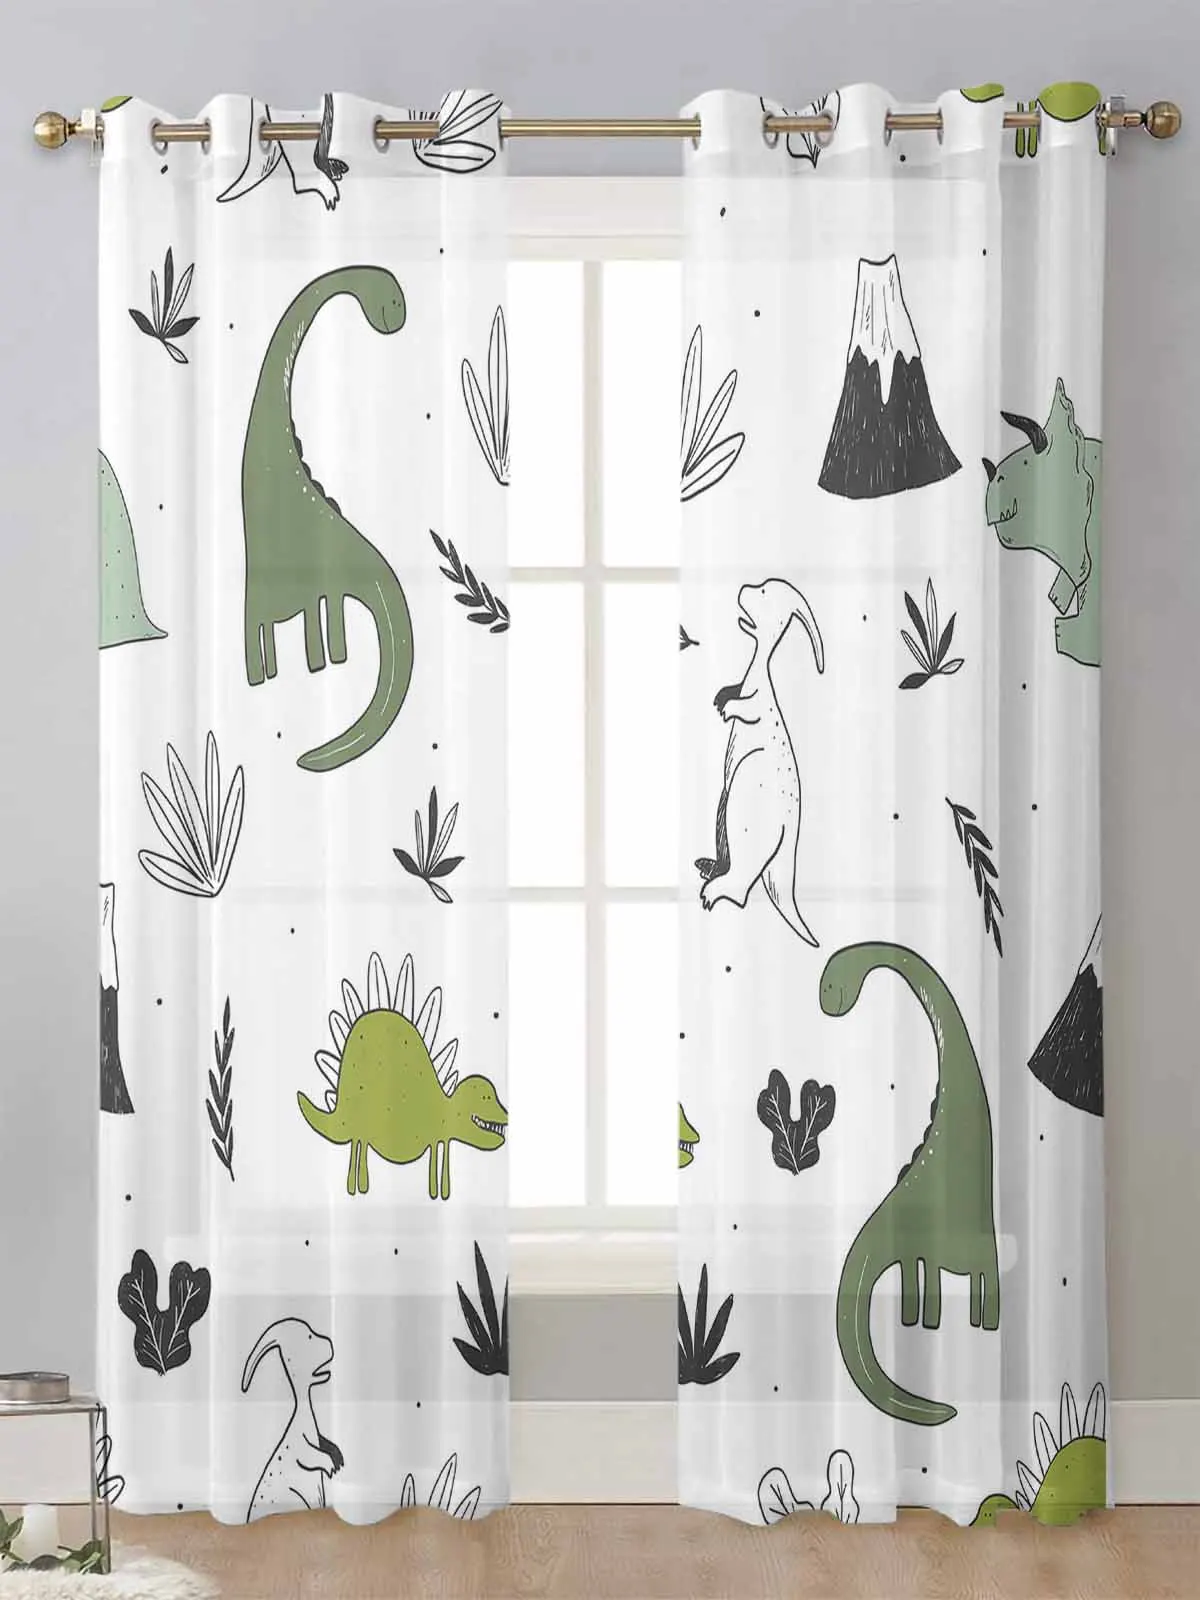 

Animal Green Dinosaur Plant Sheer Curtains For Living Room Window Transparent Voile Tulle Curtain Cortinas Drapes Home Decor